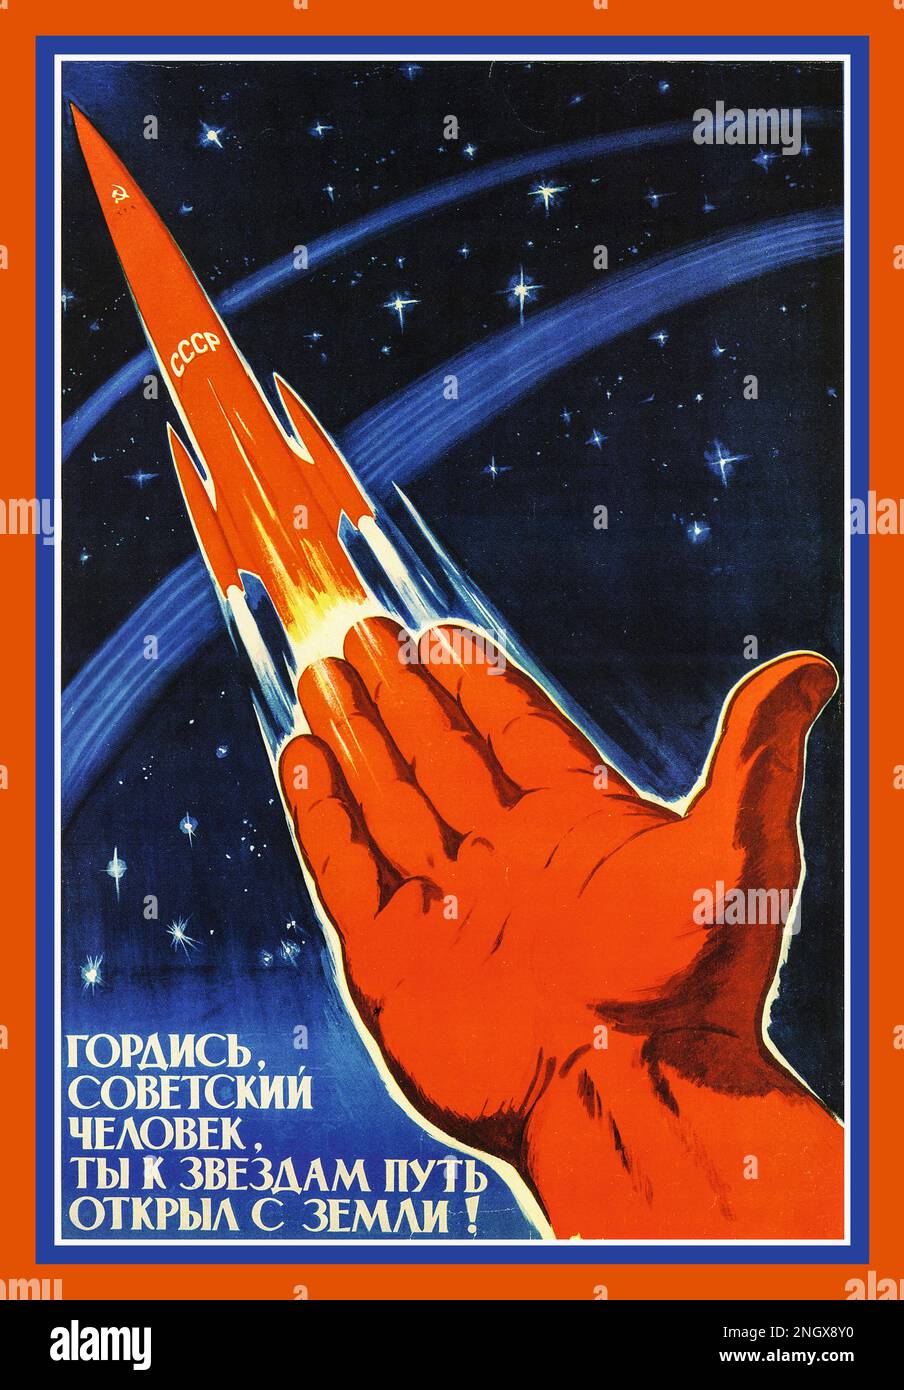 Vintage 1950s Soviet USSR Russian Propaganda CCCP Space Race Poster. 'BE PROUD MAN OF USSR YOU OPENED THE WAY TO THE STARS FROM EARTH' Hand pointing to the stars with CCCP rocket heading to the stars. Stock Photo